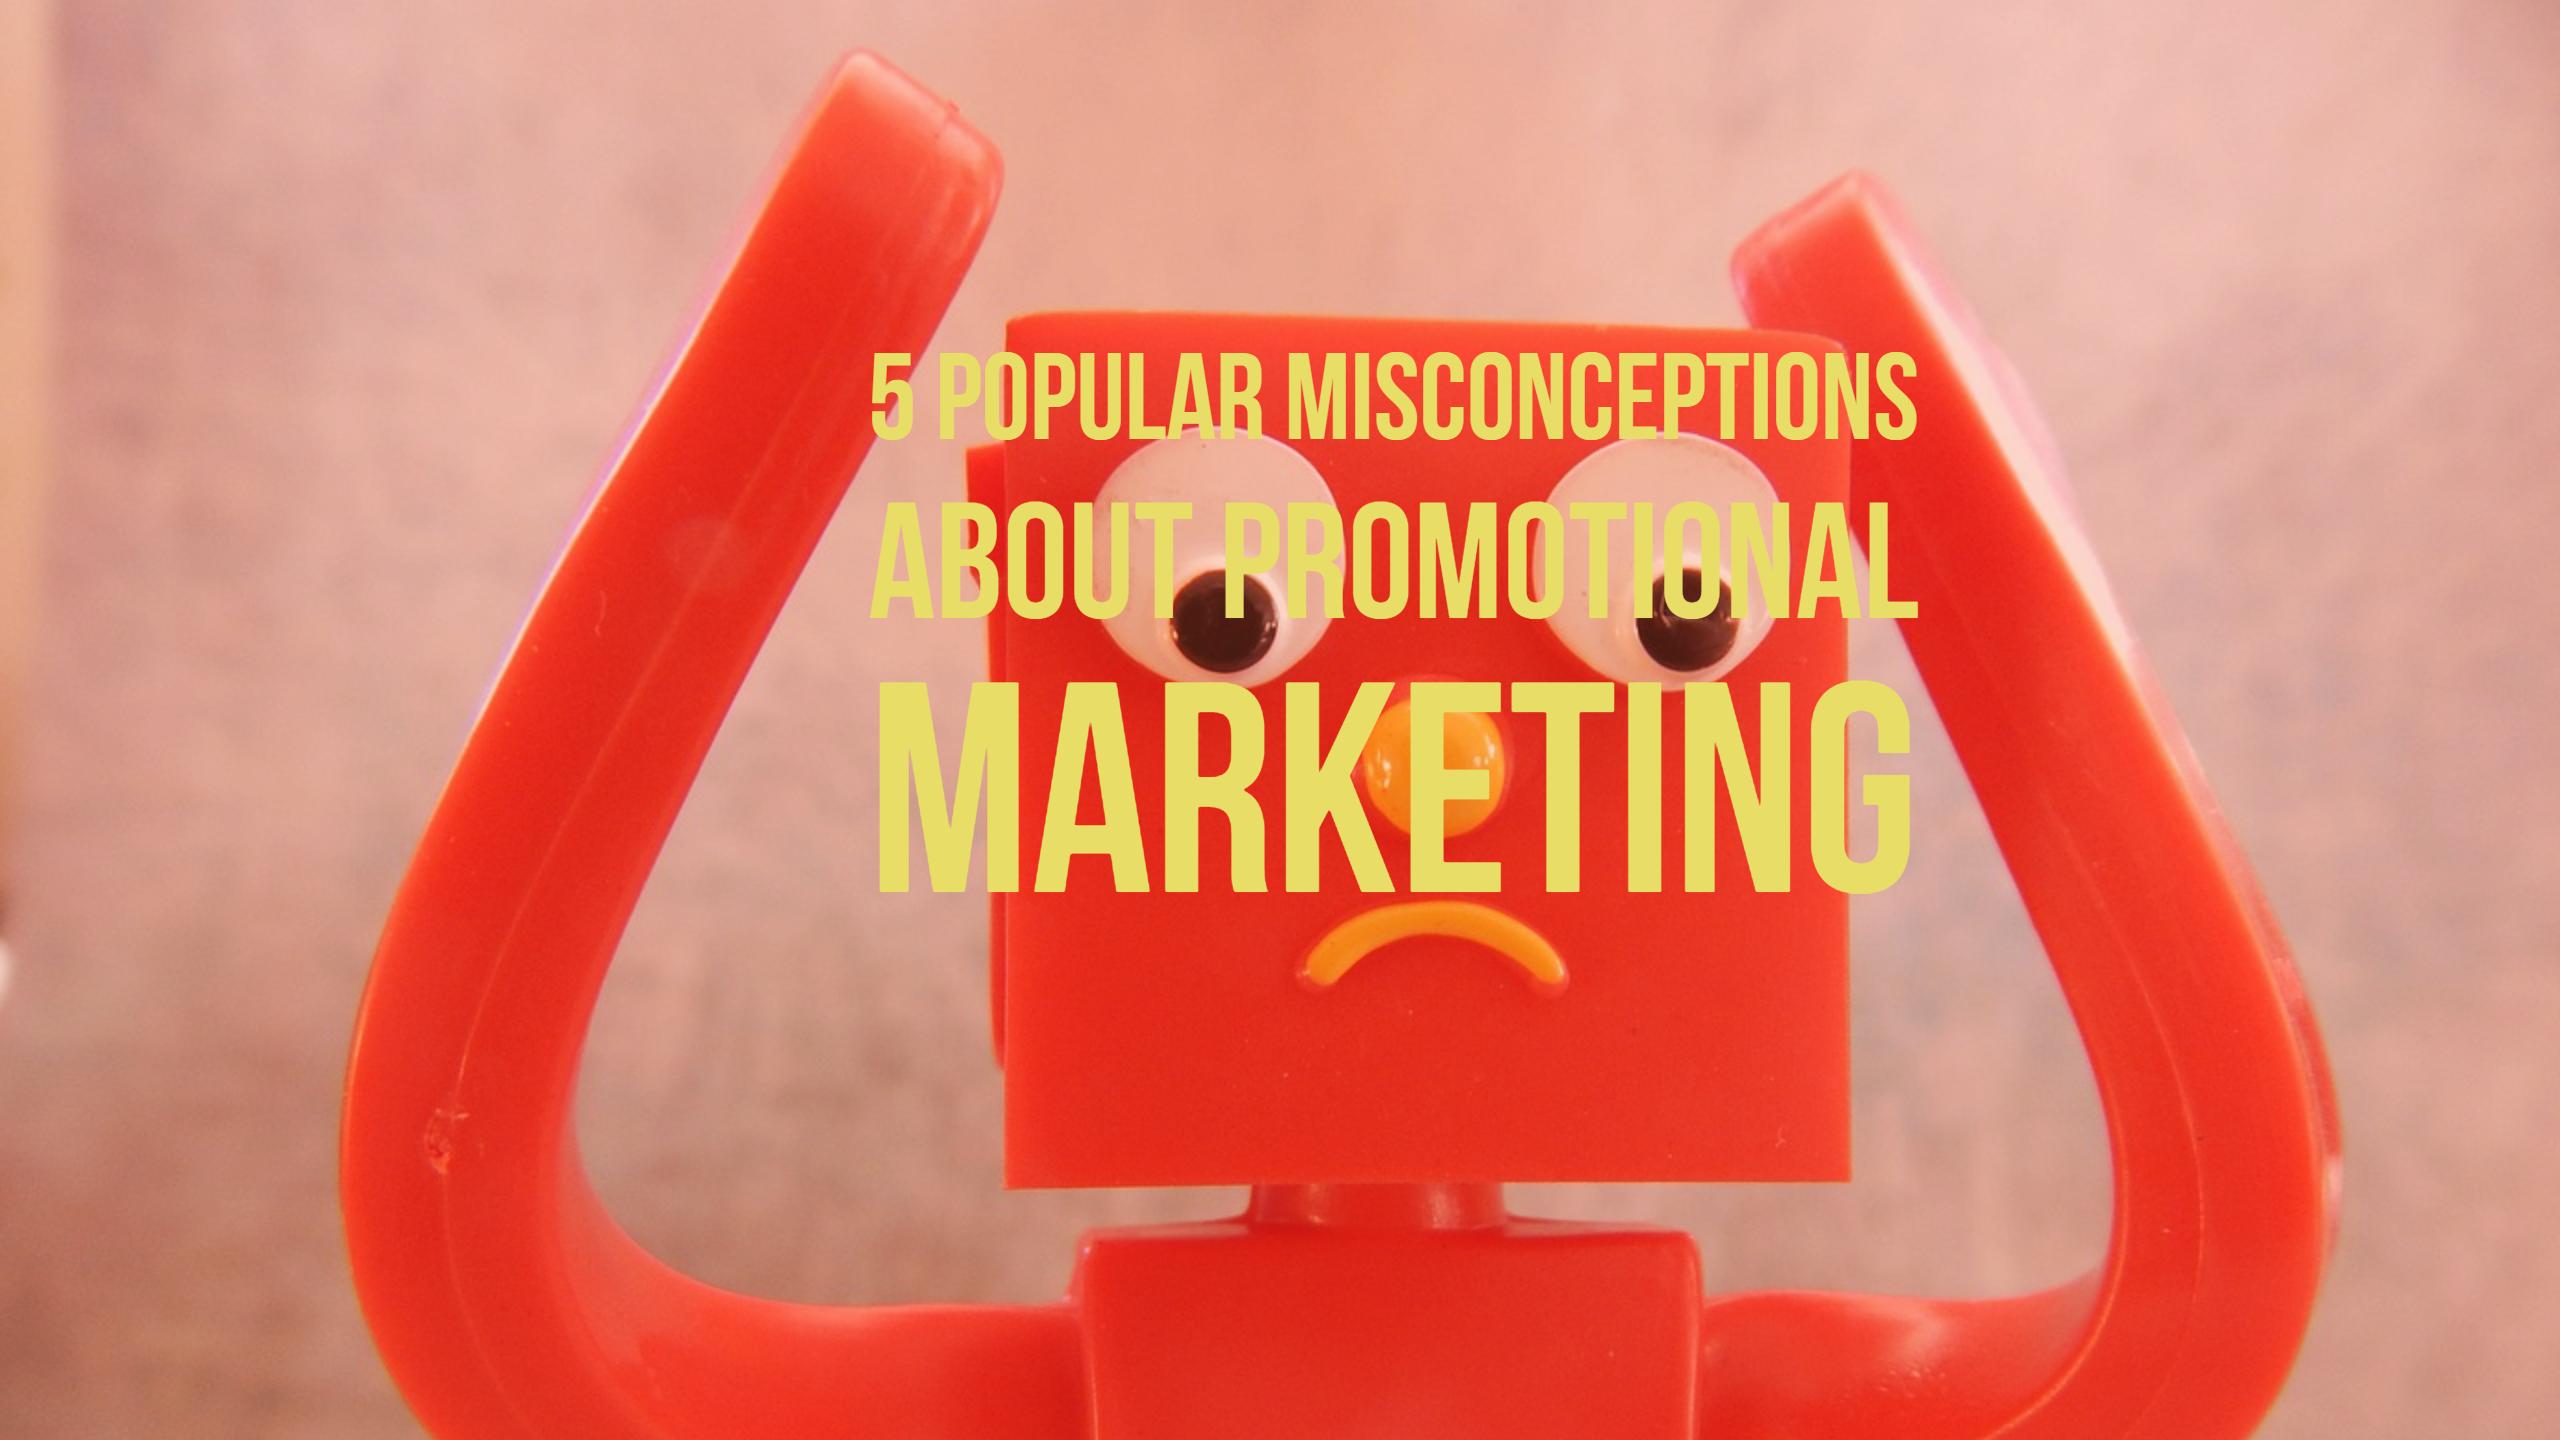 5 Popular Misconceptions About Promotional Marketing